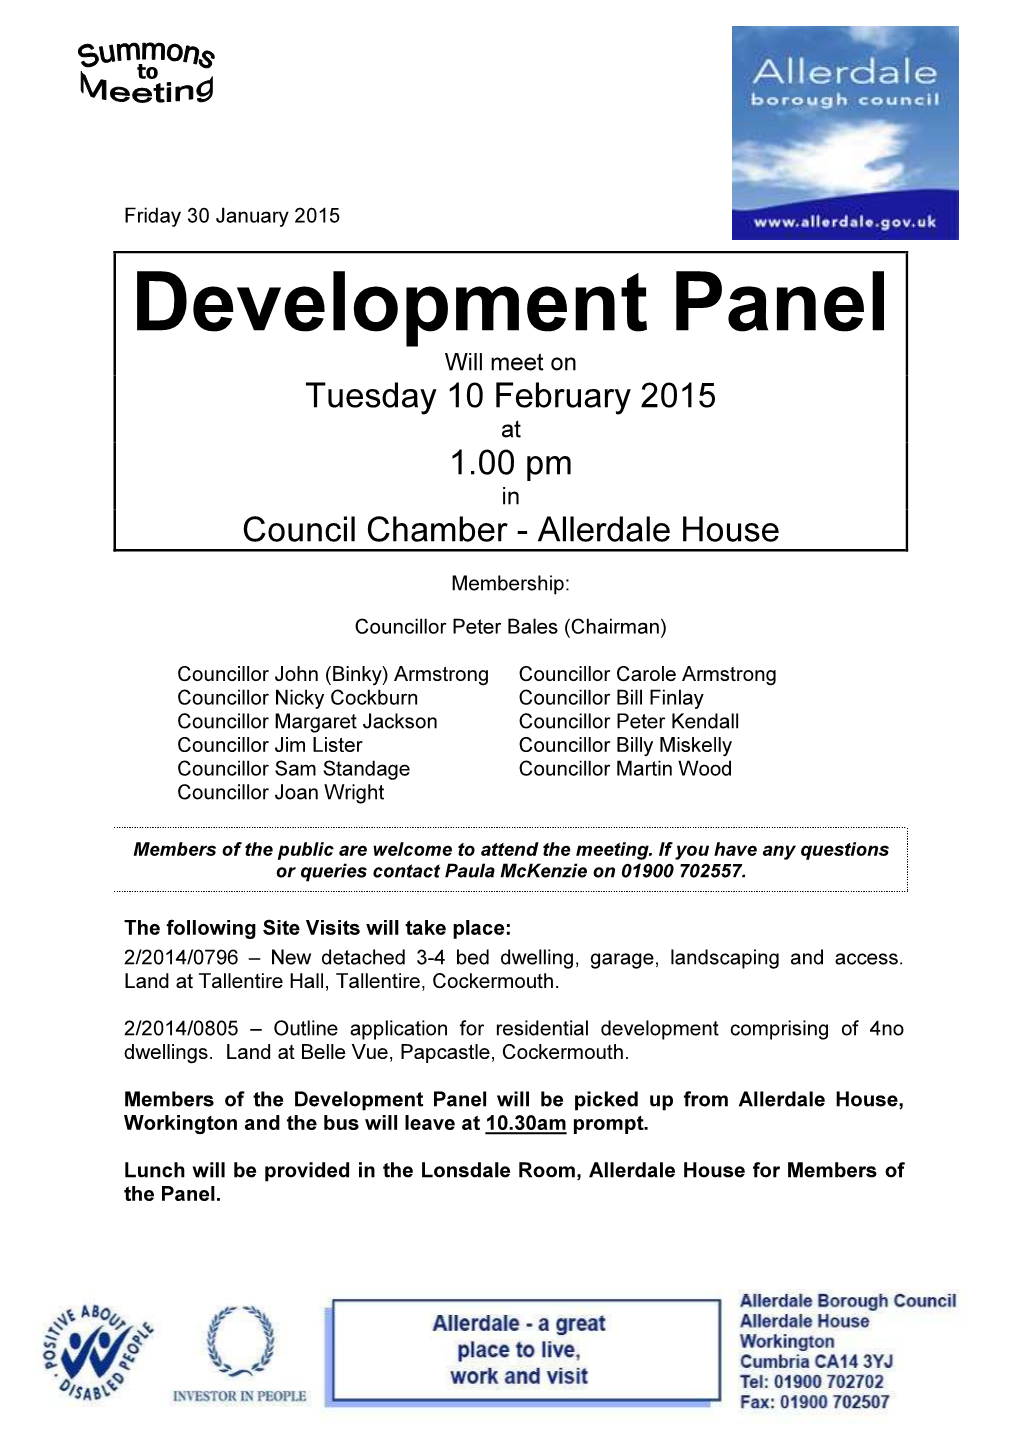 Development Panel Will Meet on Tuesday 10 February 2015 at 1.00 Pm in Council Chamber - Allerdale House